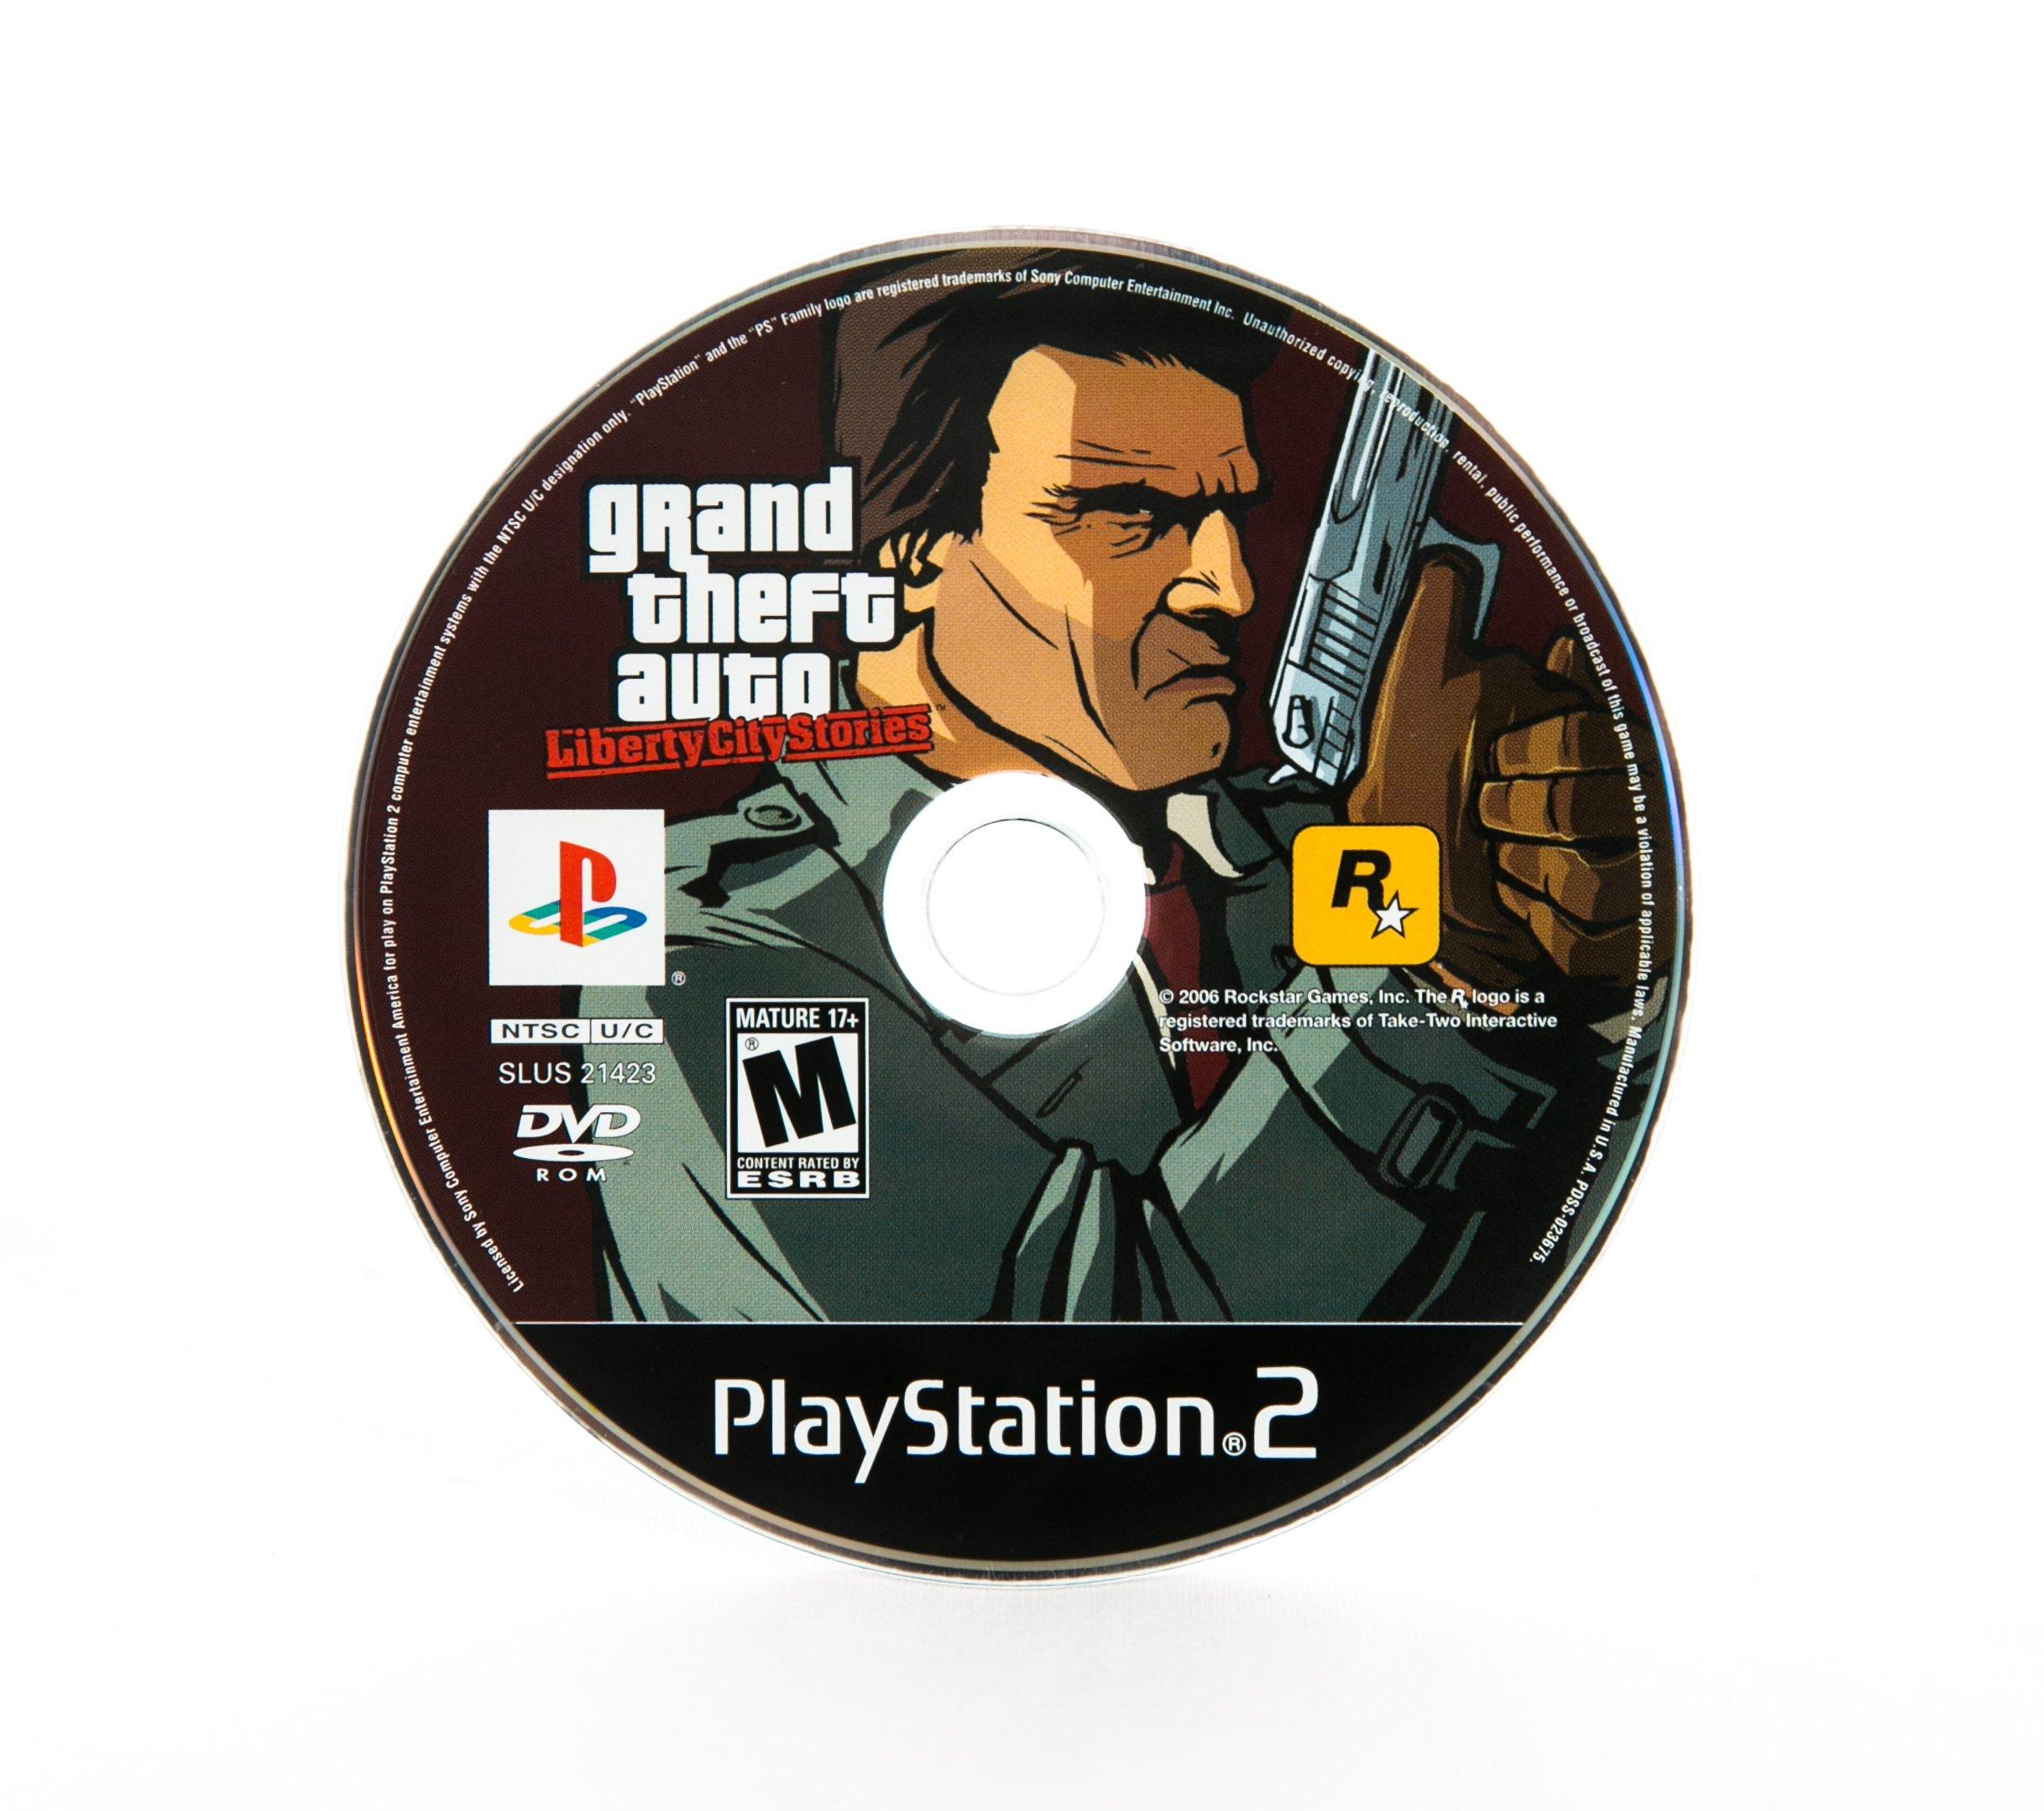 Grand Theft Auto Double Pack: Grand Theft Auto III / Grand Theft Auto Vice  City - PlayStation 2